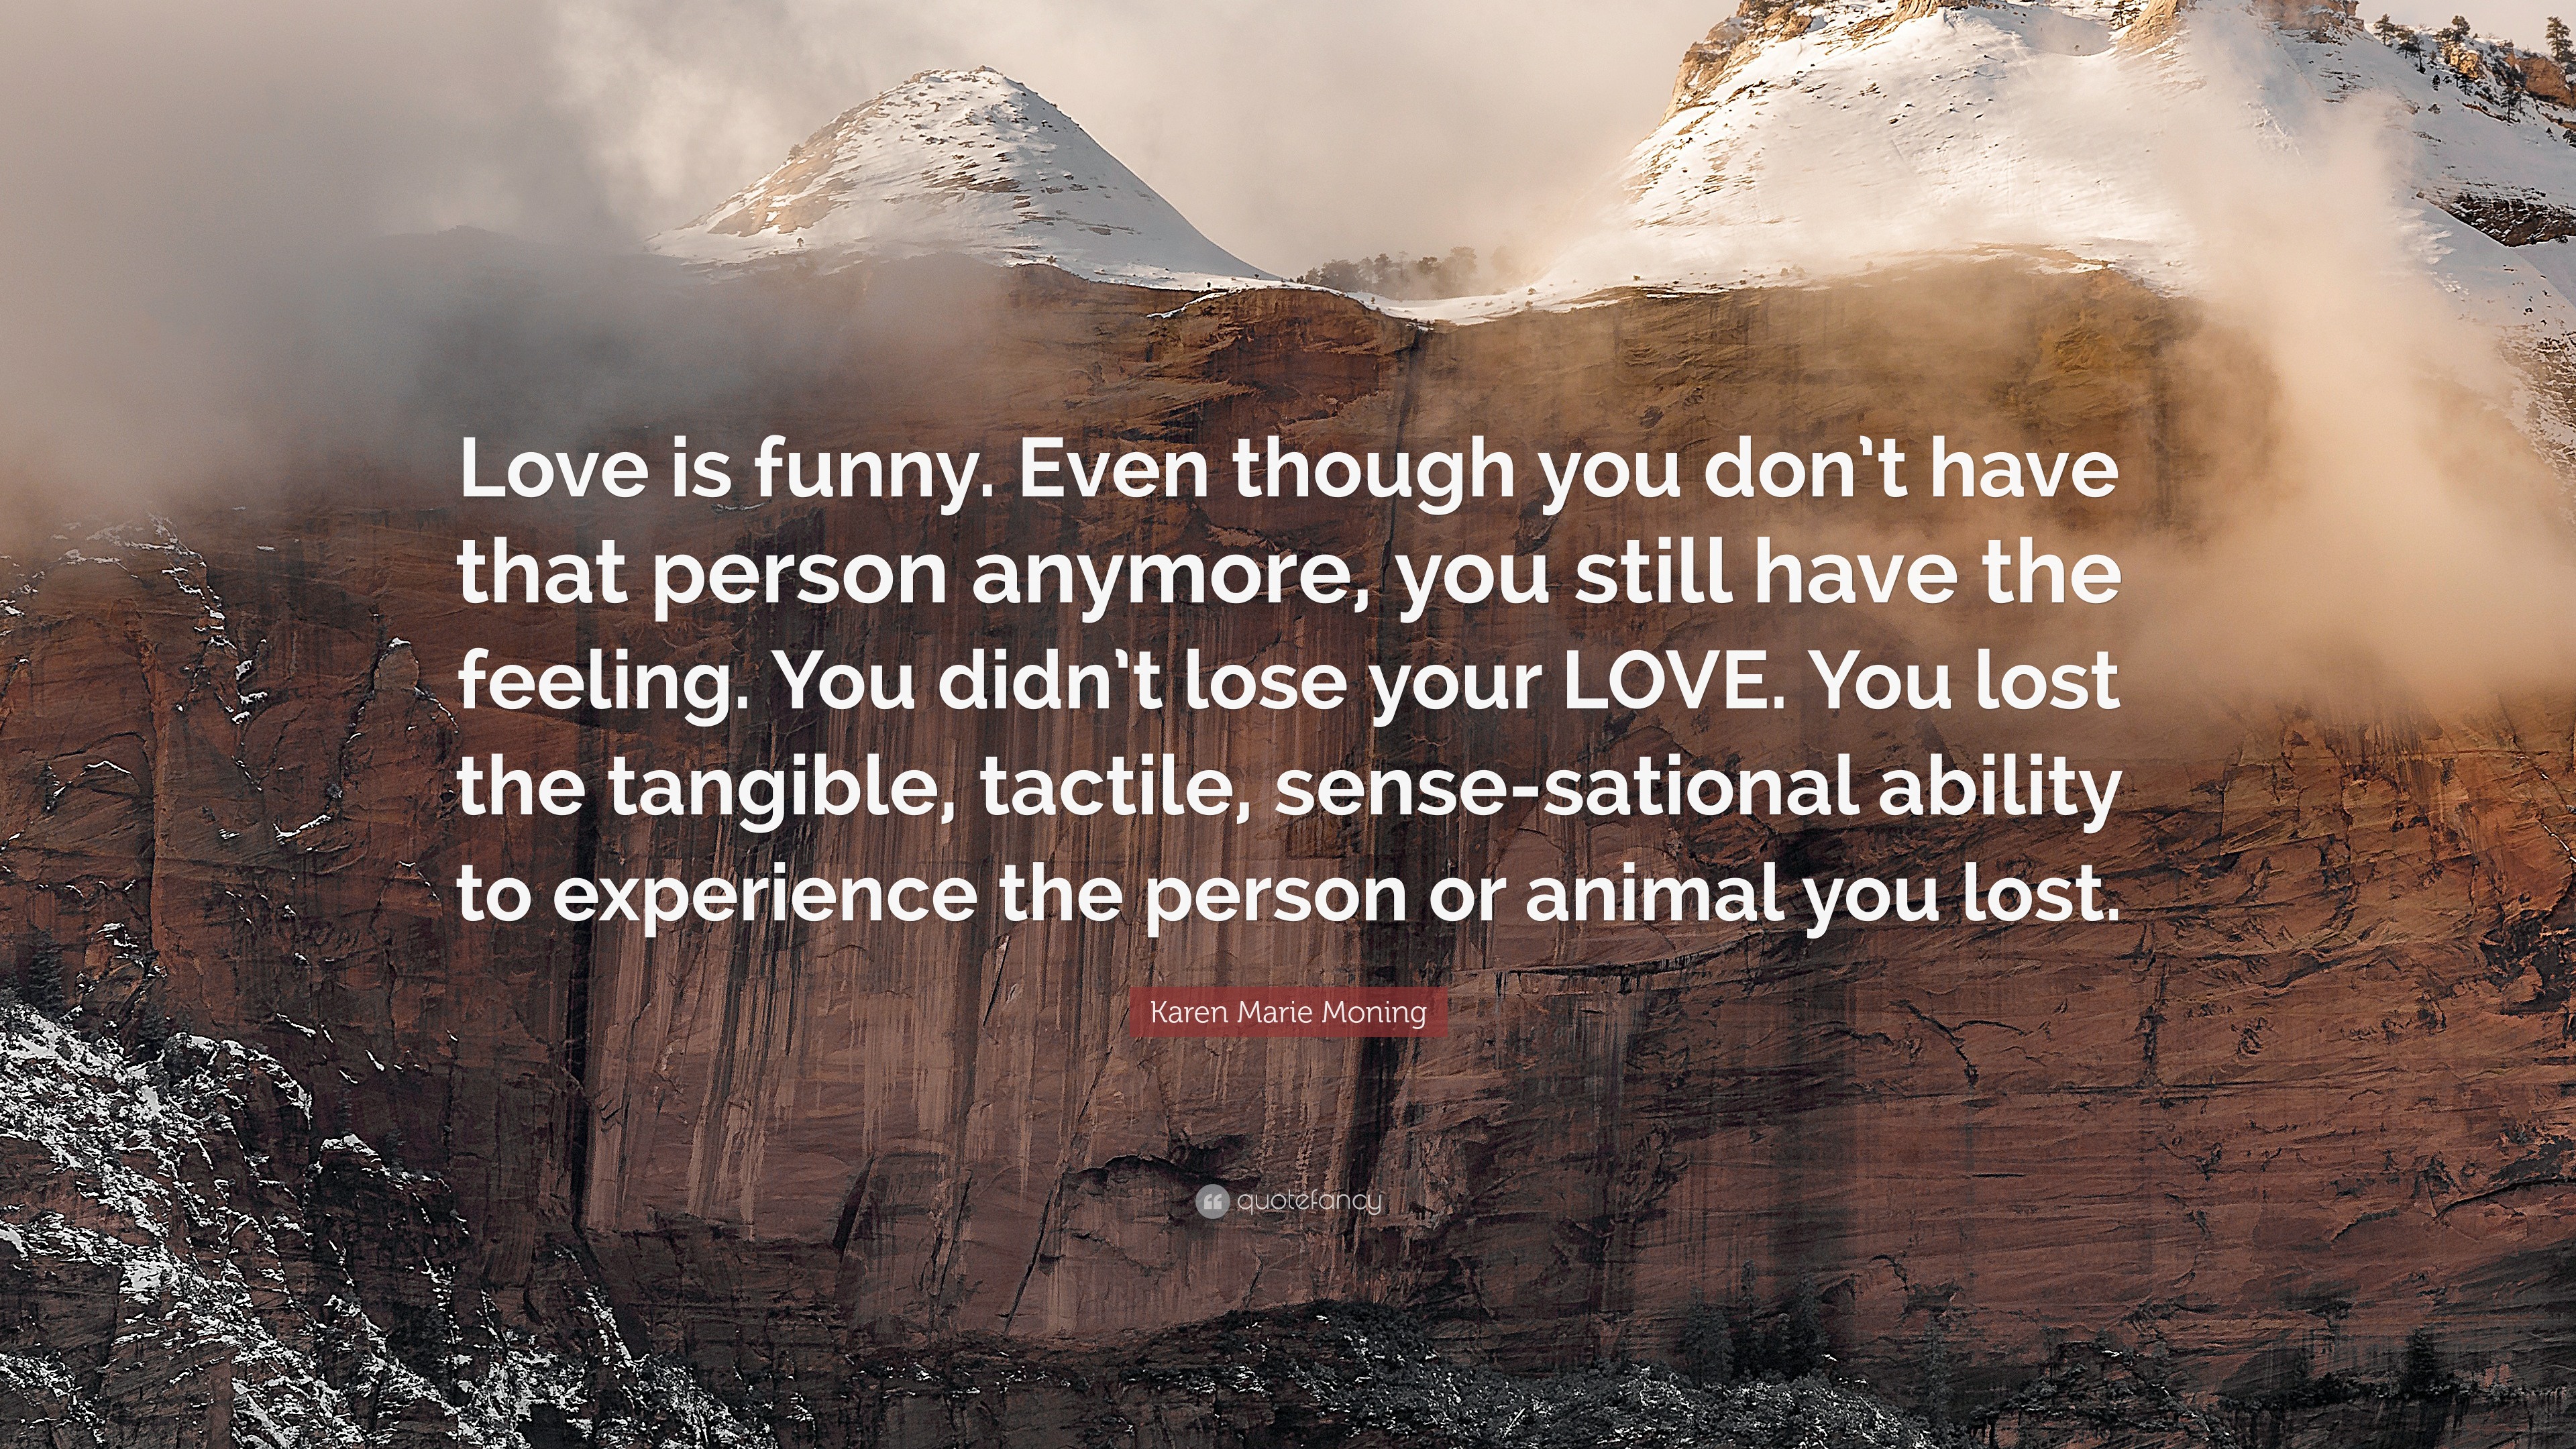 Karen Marie Moning Quote: “Love is funny. Even though you don't have that  person anymore, you still have the feeling. You didn't lose your LOVE.  Yo...”